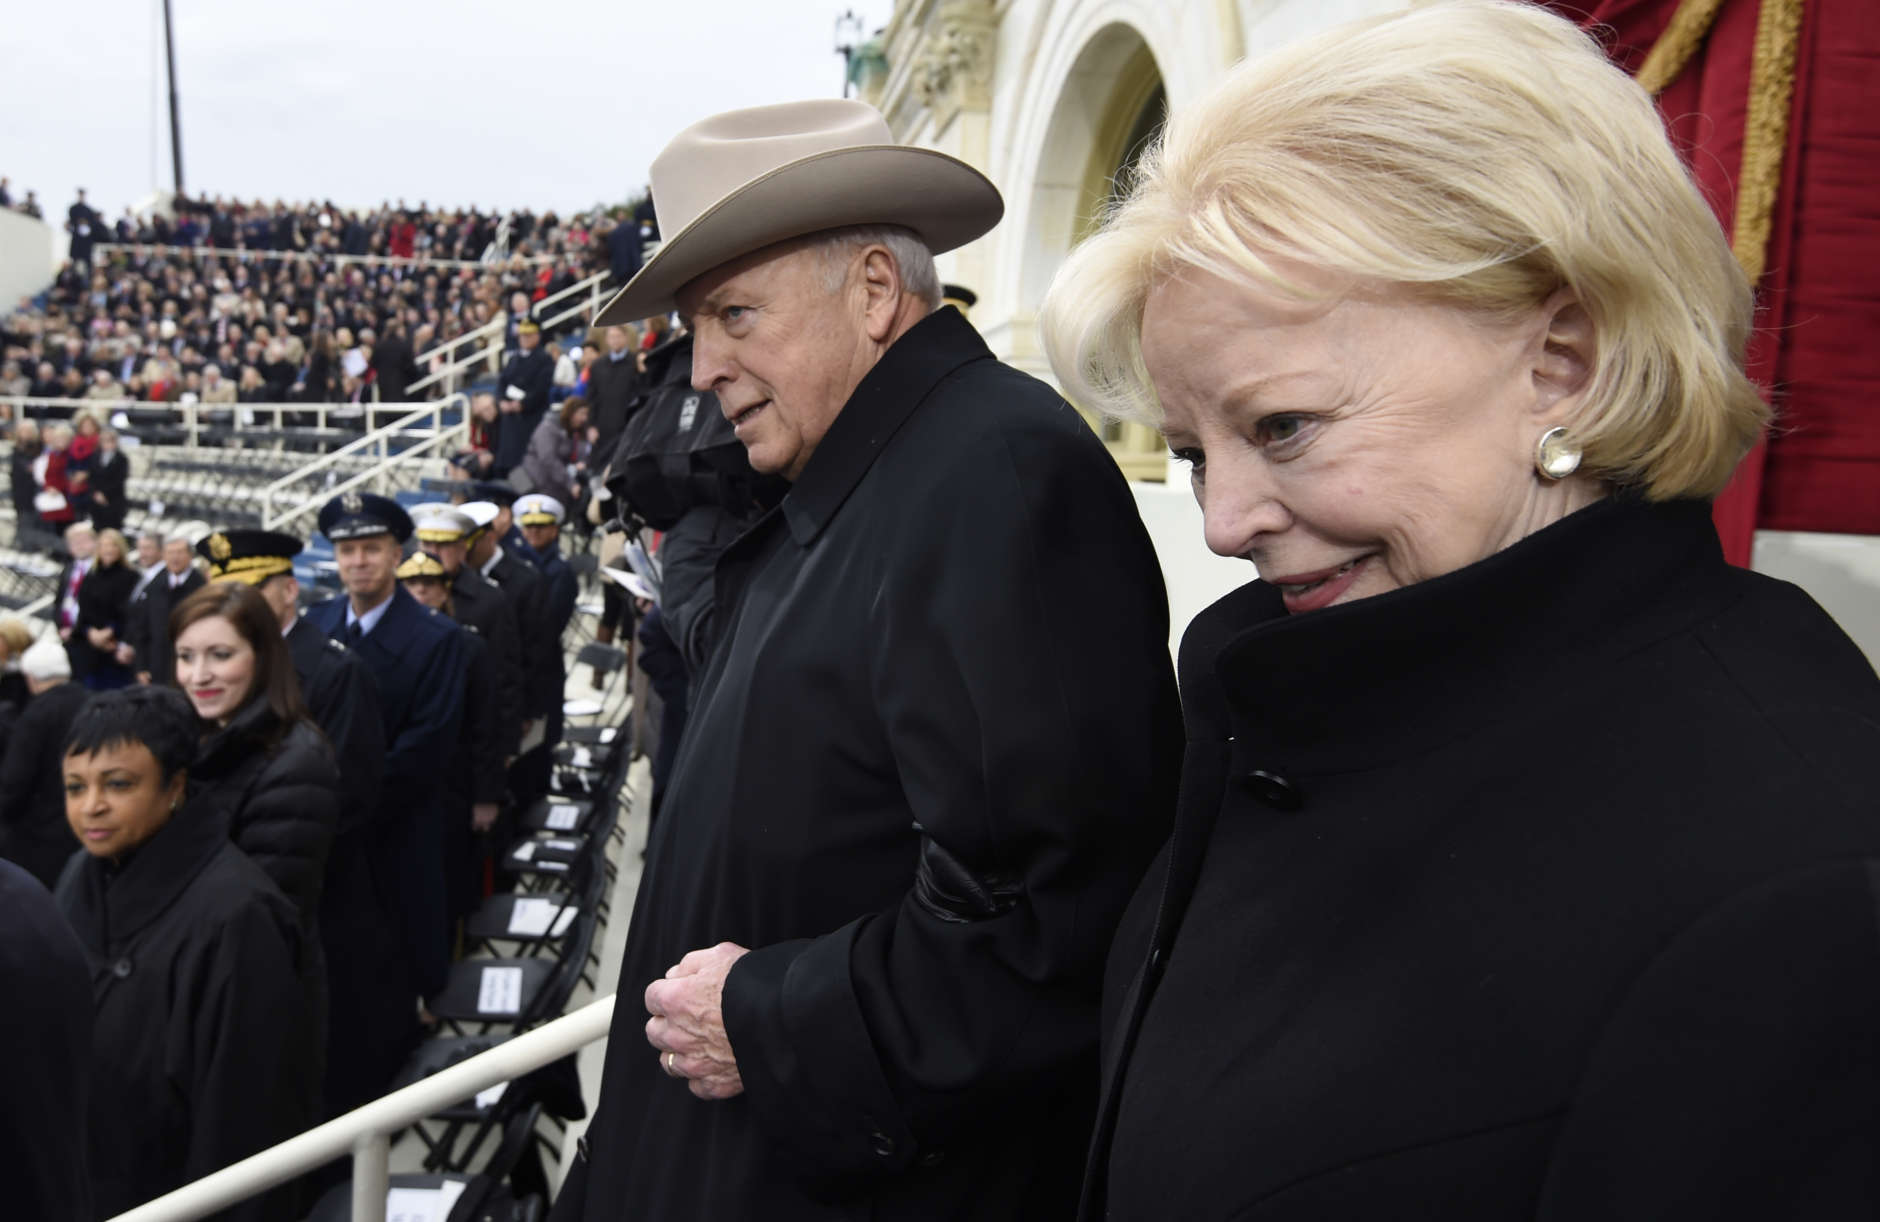 WASHINGTON, DC - JANUARY 20: Former US Vice President Dick Cheney and his wife Lynne arrive for the Presidential Inauguration of Donald Trump at the US Capitol on January 20, 2017 in Washington, DC. Donald J. Trump will become the 45th president of the United States today.  (Photo by Saul Loeb - Pool/Getty Images)